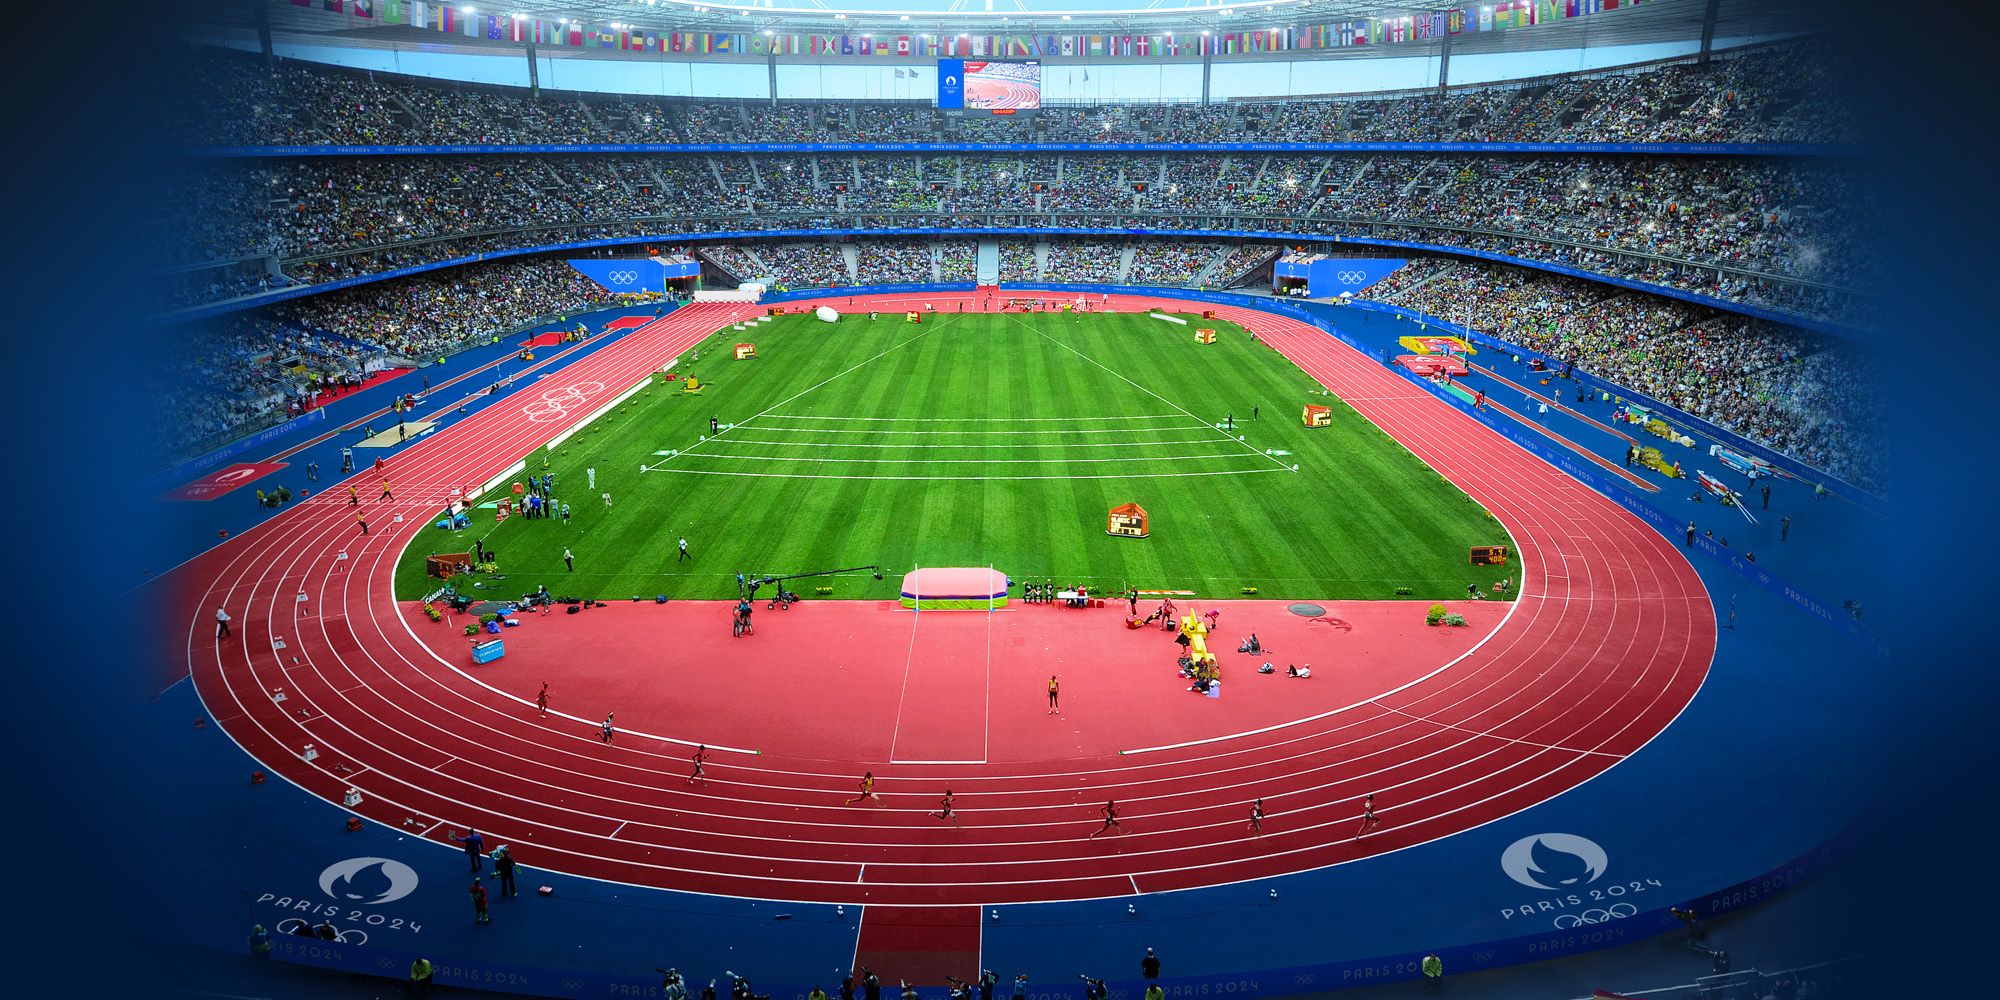 Stade de France, venue of the athletics at the Paris 2024 Olympic Games